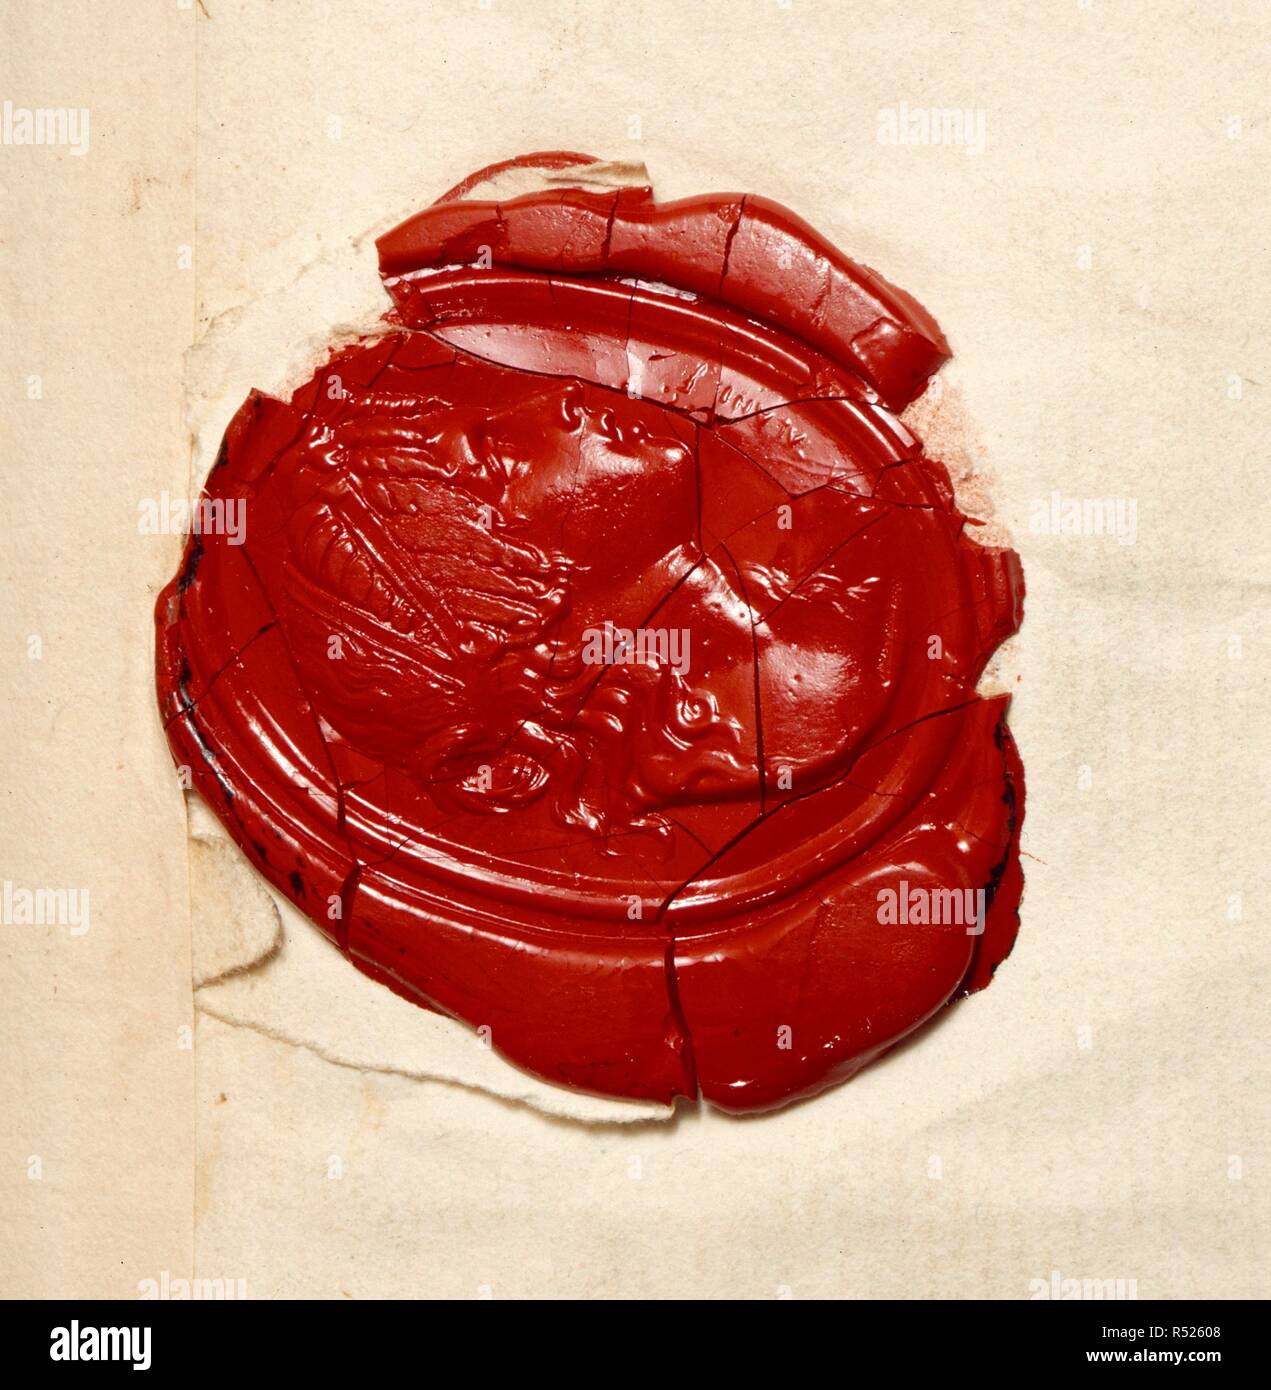 Seal from letter of Lord Nelson. 1801. [Seal only] Seal impression attached to letter of Lord Nelson to Lady Hamilton, 2 April 1801  Originally published/produced in 1801. . Source: Egerton 1614, f.35v. Language: English. Stock Photo